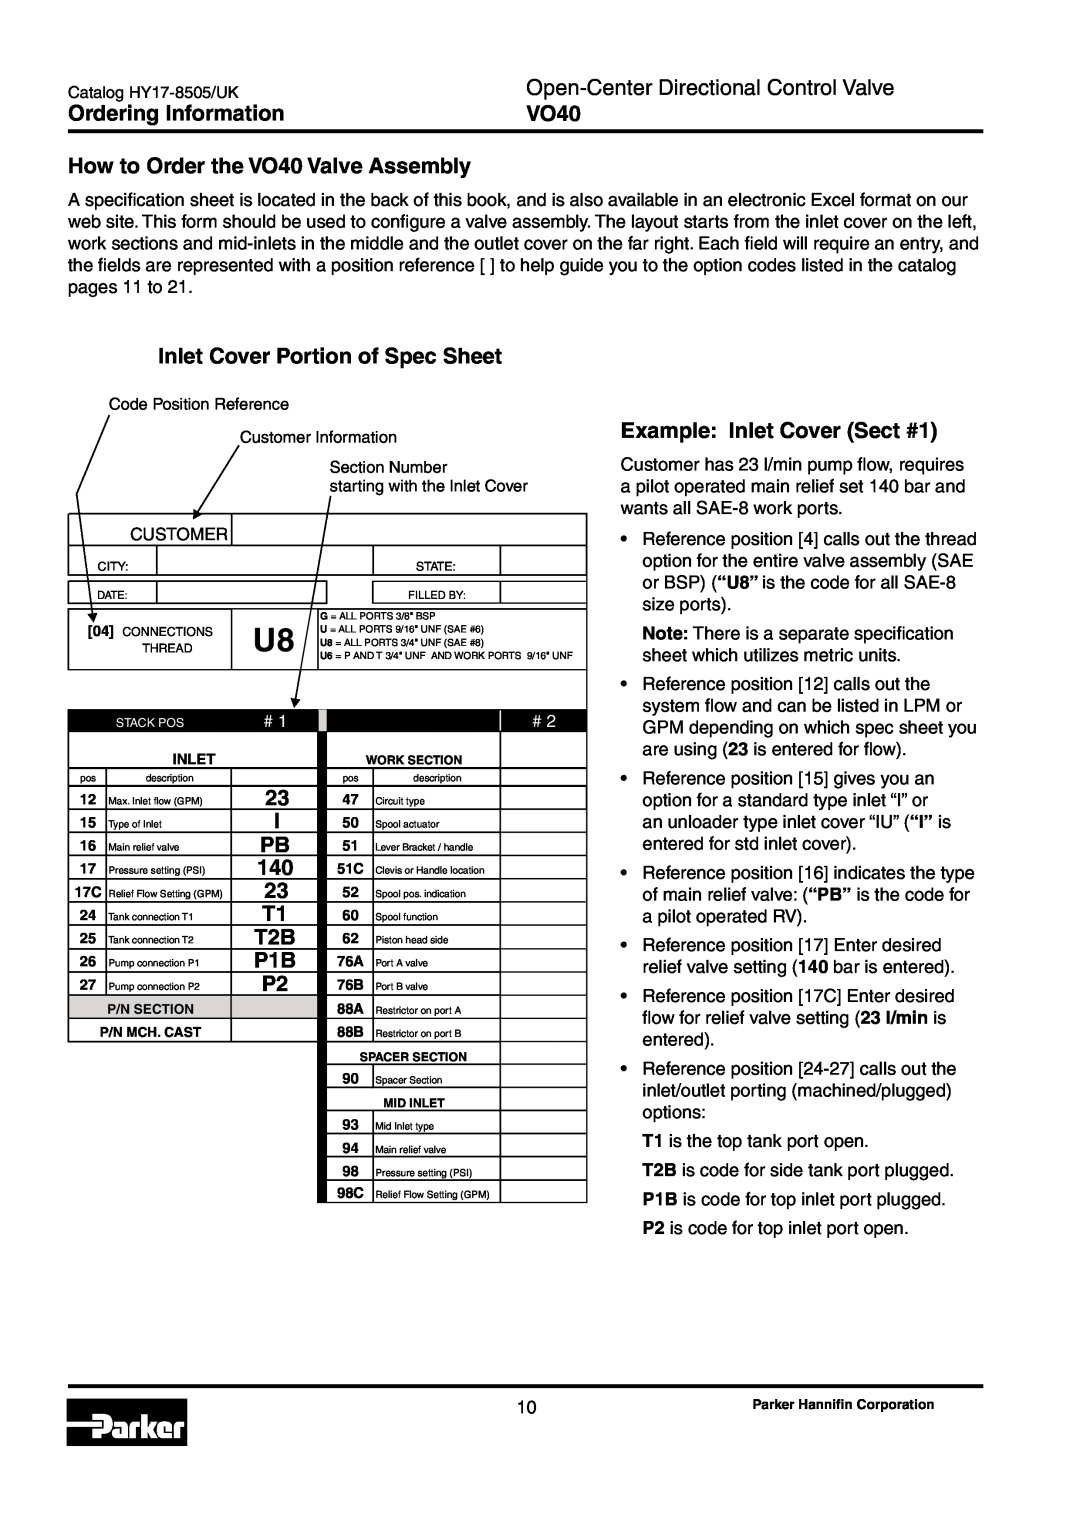 Parker Hannifin manual Ordering Information, How to Order the VO40 Valve Assembly, Inlet Cover Portion of Spec Sheet 